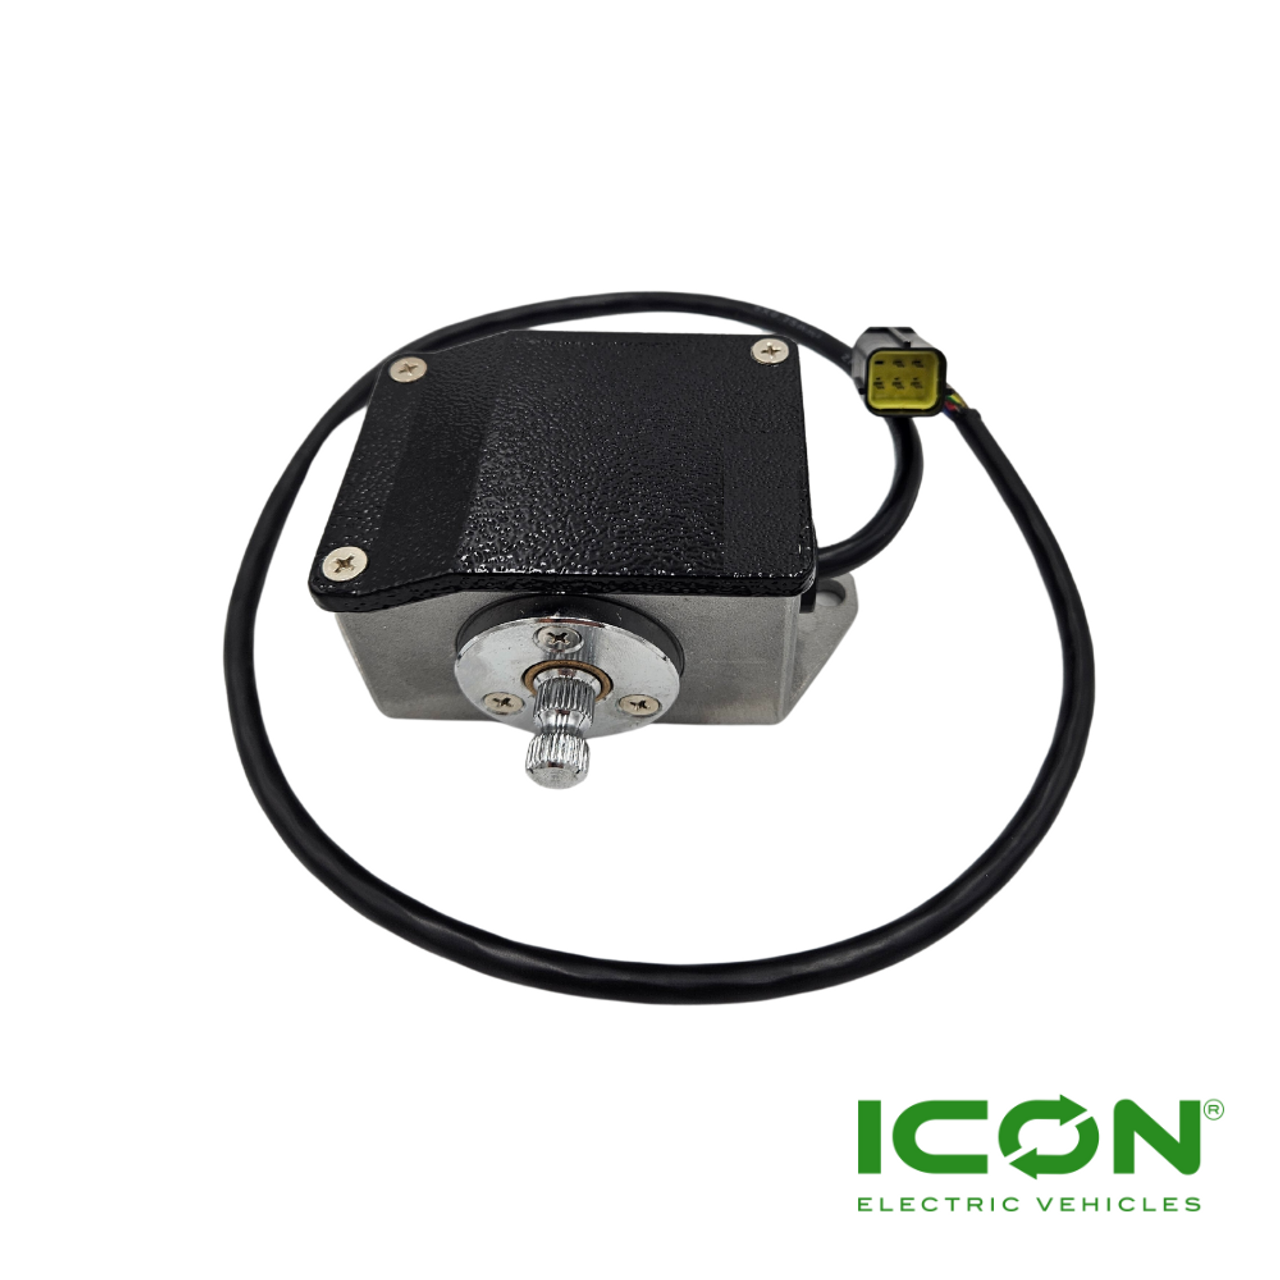 Accelerator Hall Pedal Switch for ICON Golf Cart, BRAK-654-IC, 3.03.005.000019, 3.202.05.000013